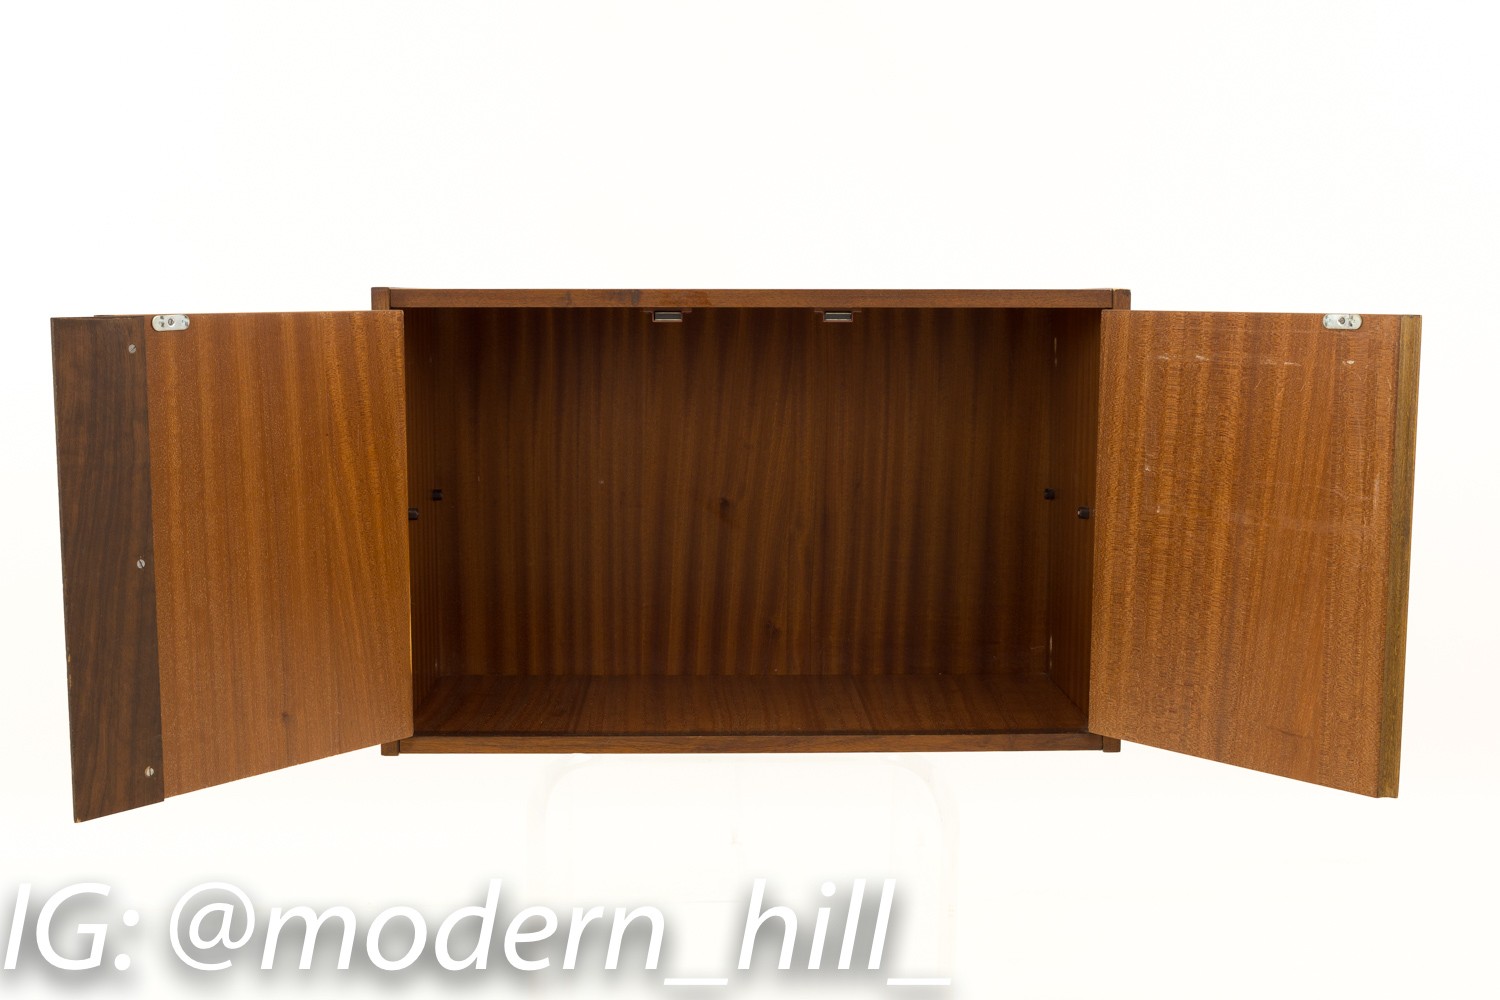 George Nelson Omni Mid Century Wall Shelving Unit Small 2 Door Cabinet (1)